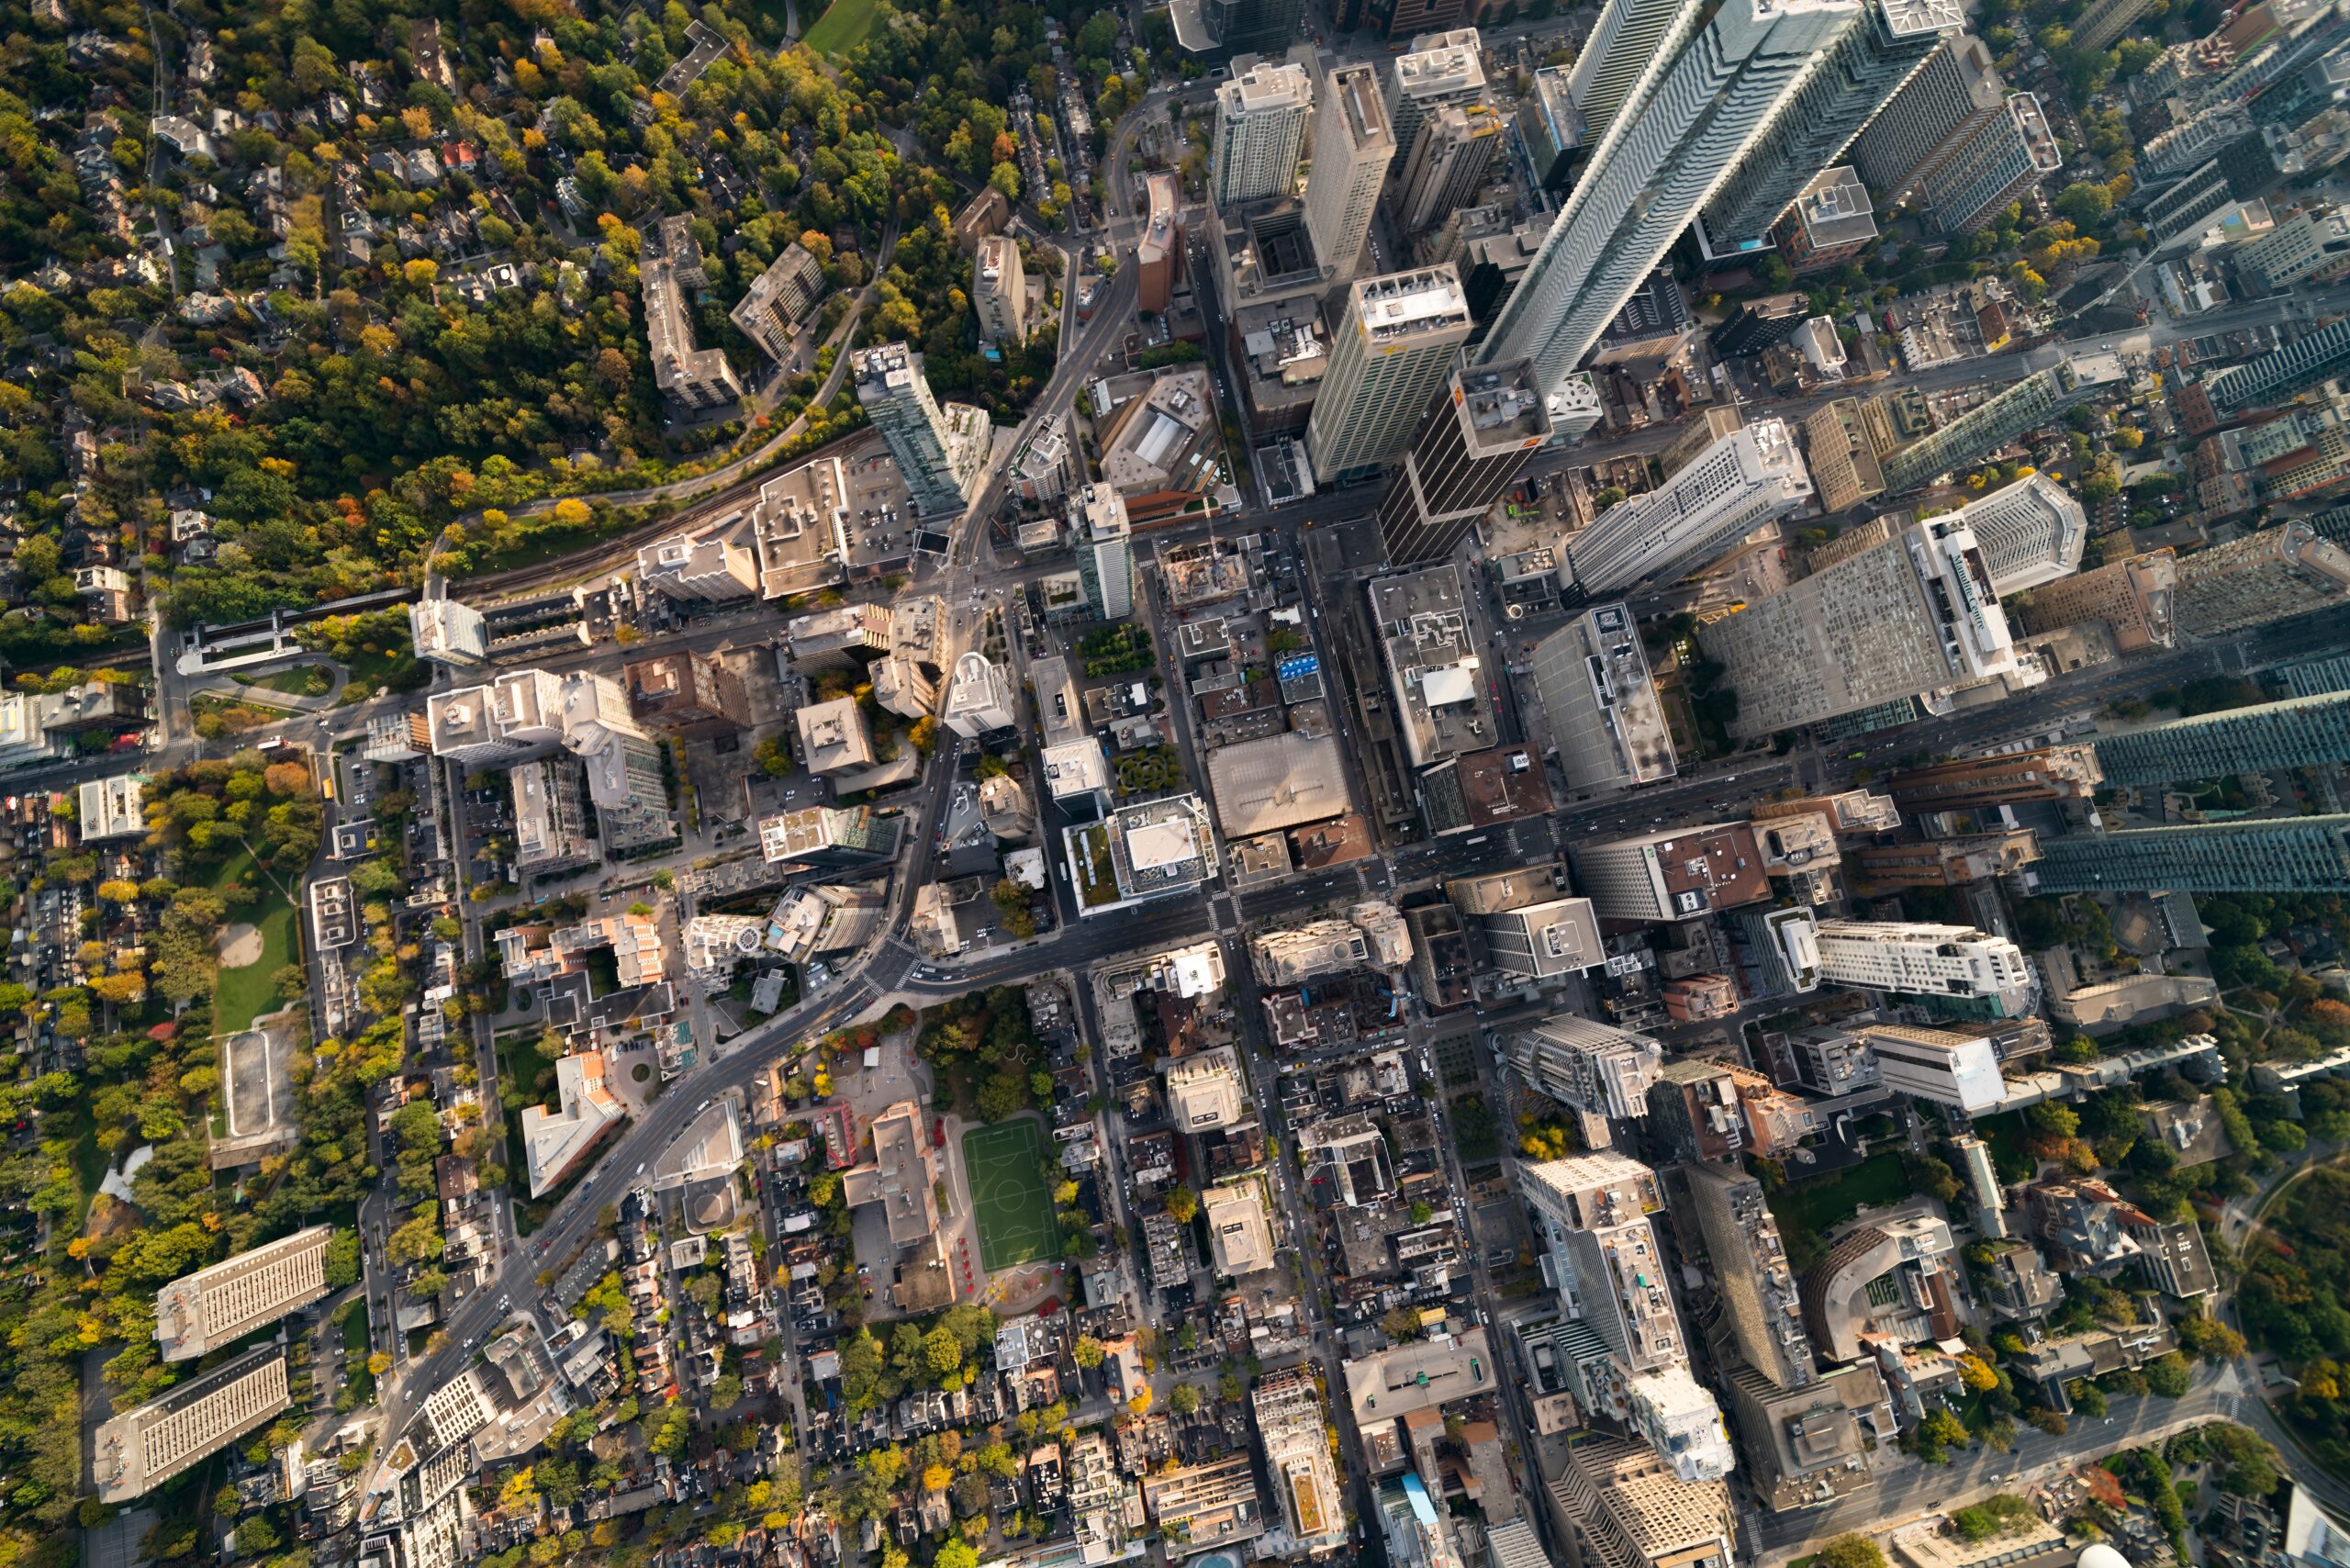 Bird's-eye view of the neighbourhood of Yorkville in Toronto, Ontario, Canada as seen from helicopter